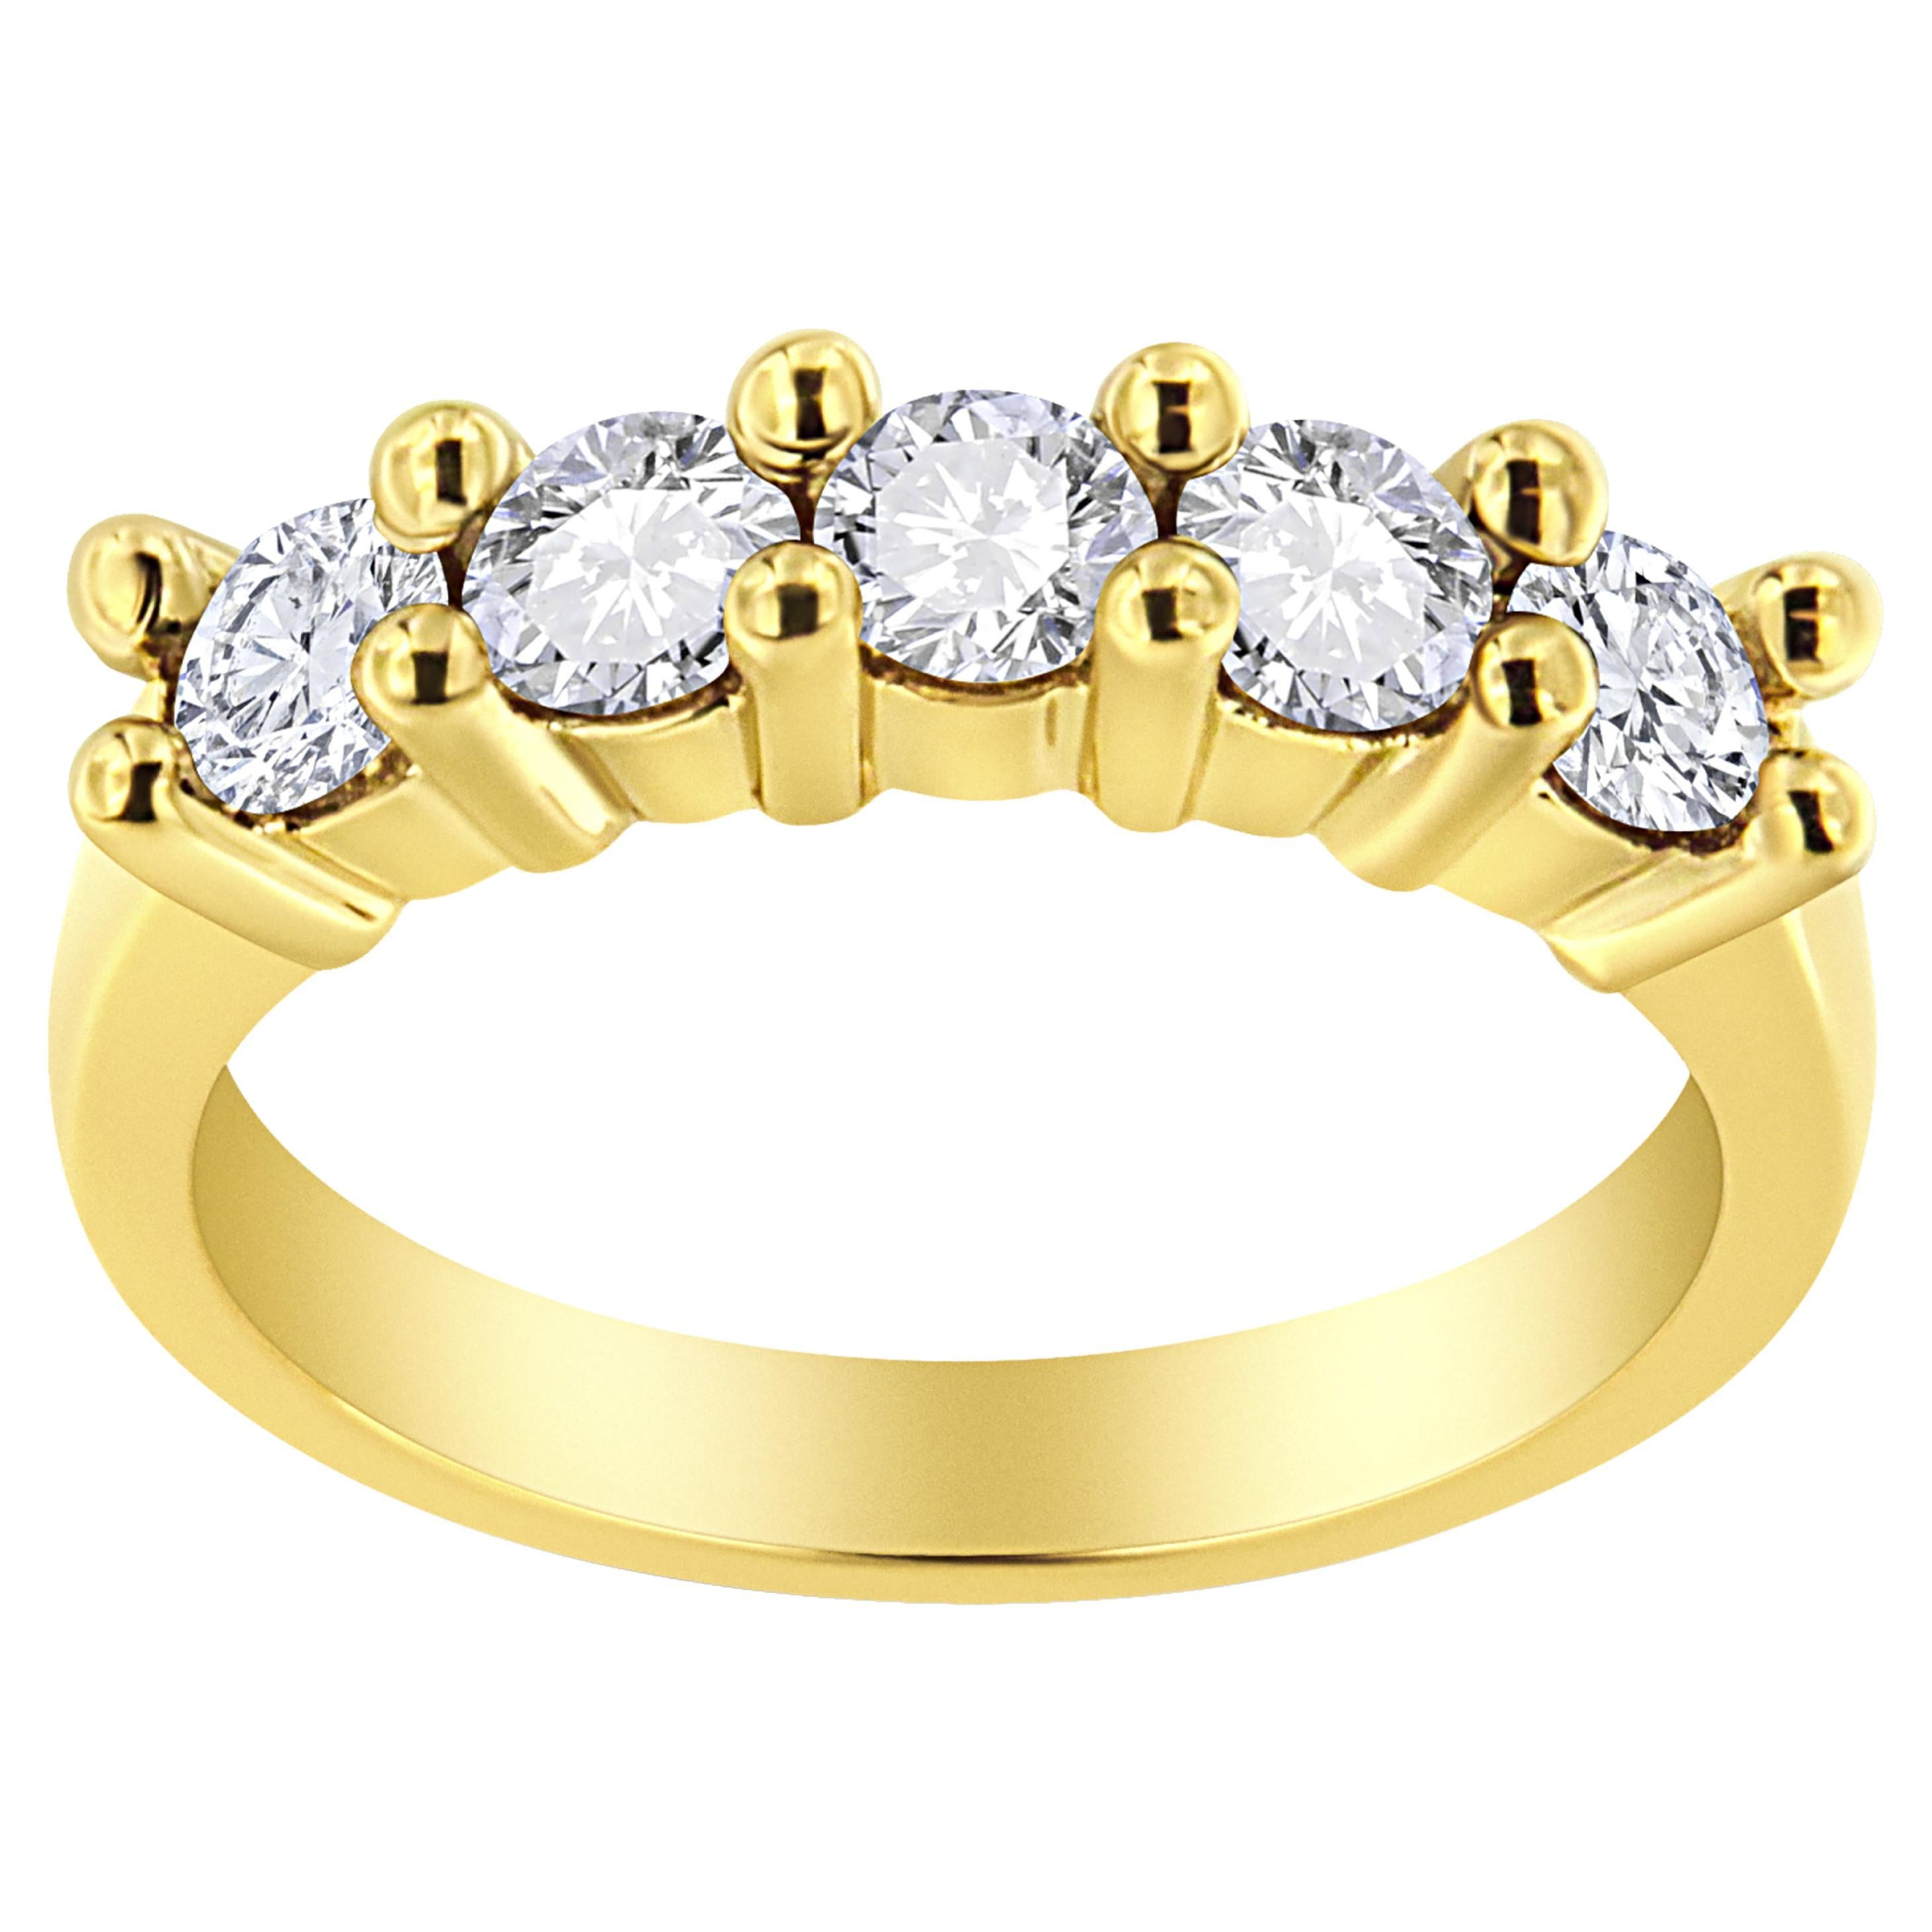 Yellow Gold Plated Sterling Silver 1.00 Carat Diamond Stone Band Ring